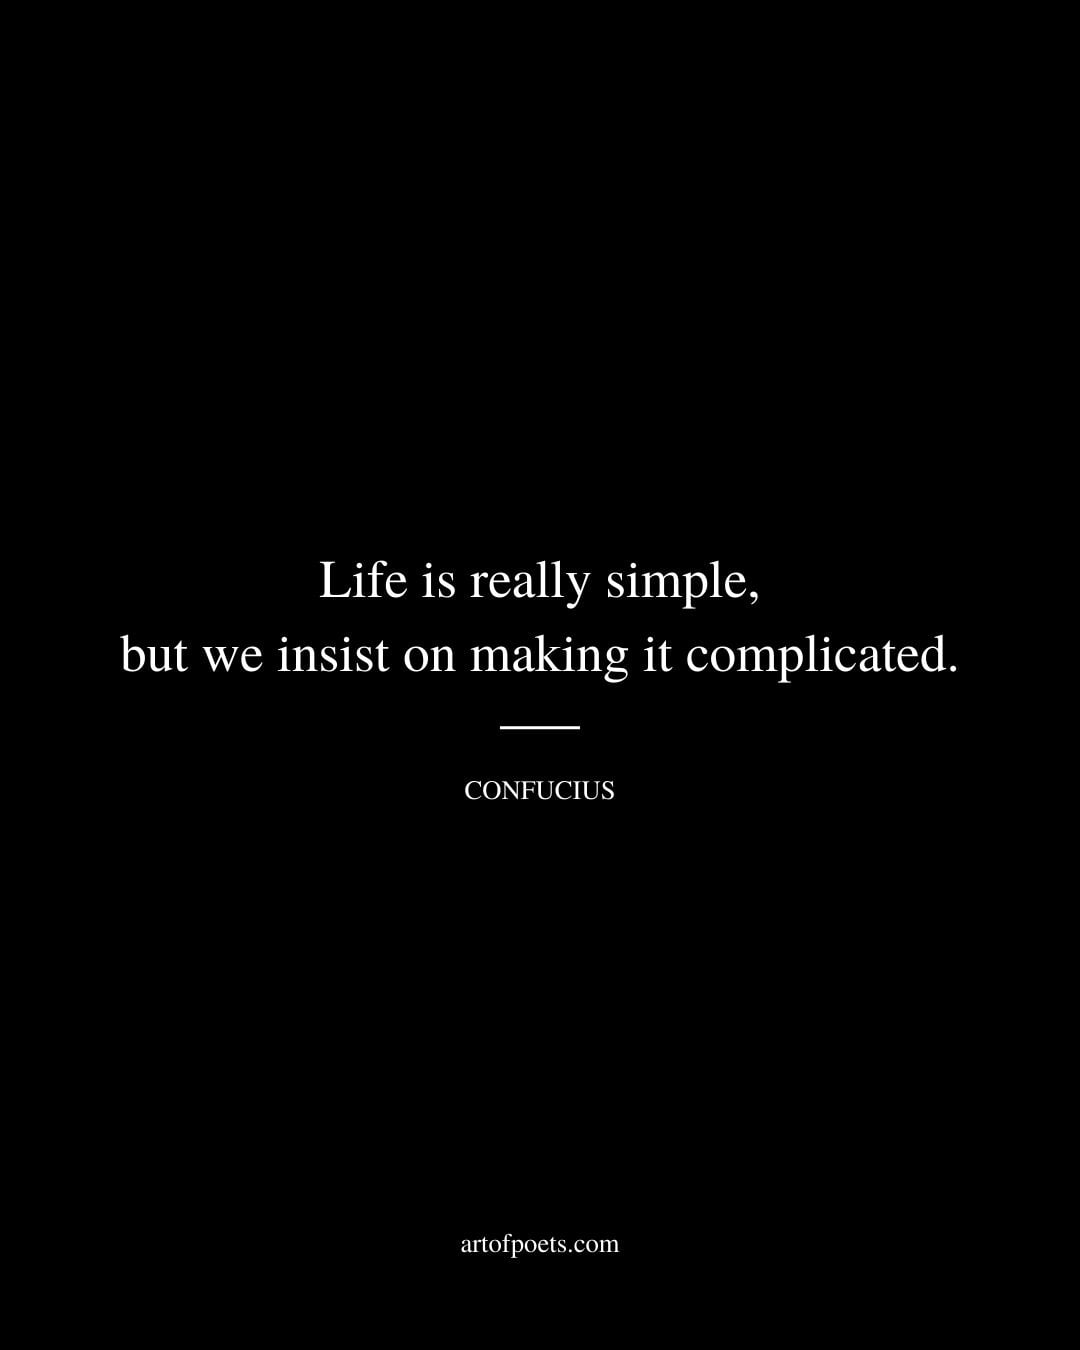 Life is really simple but we insist on making it complicated